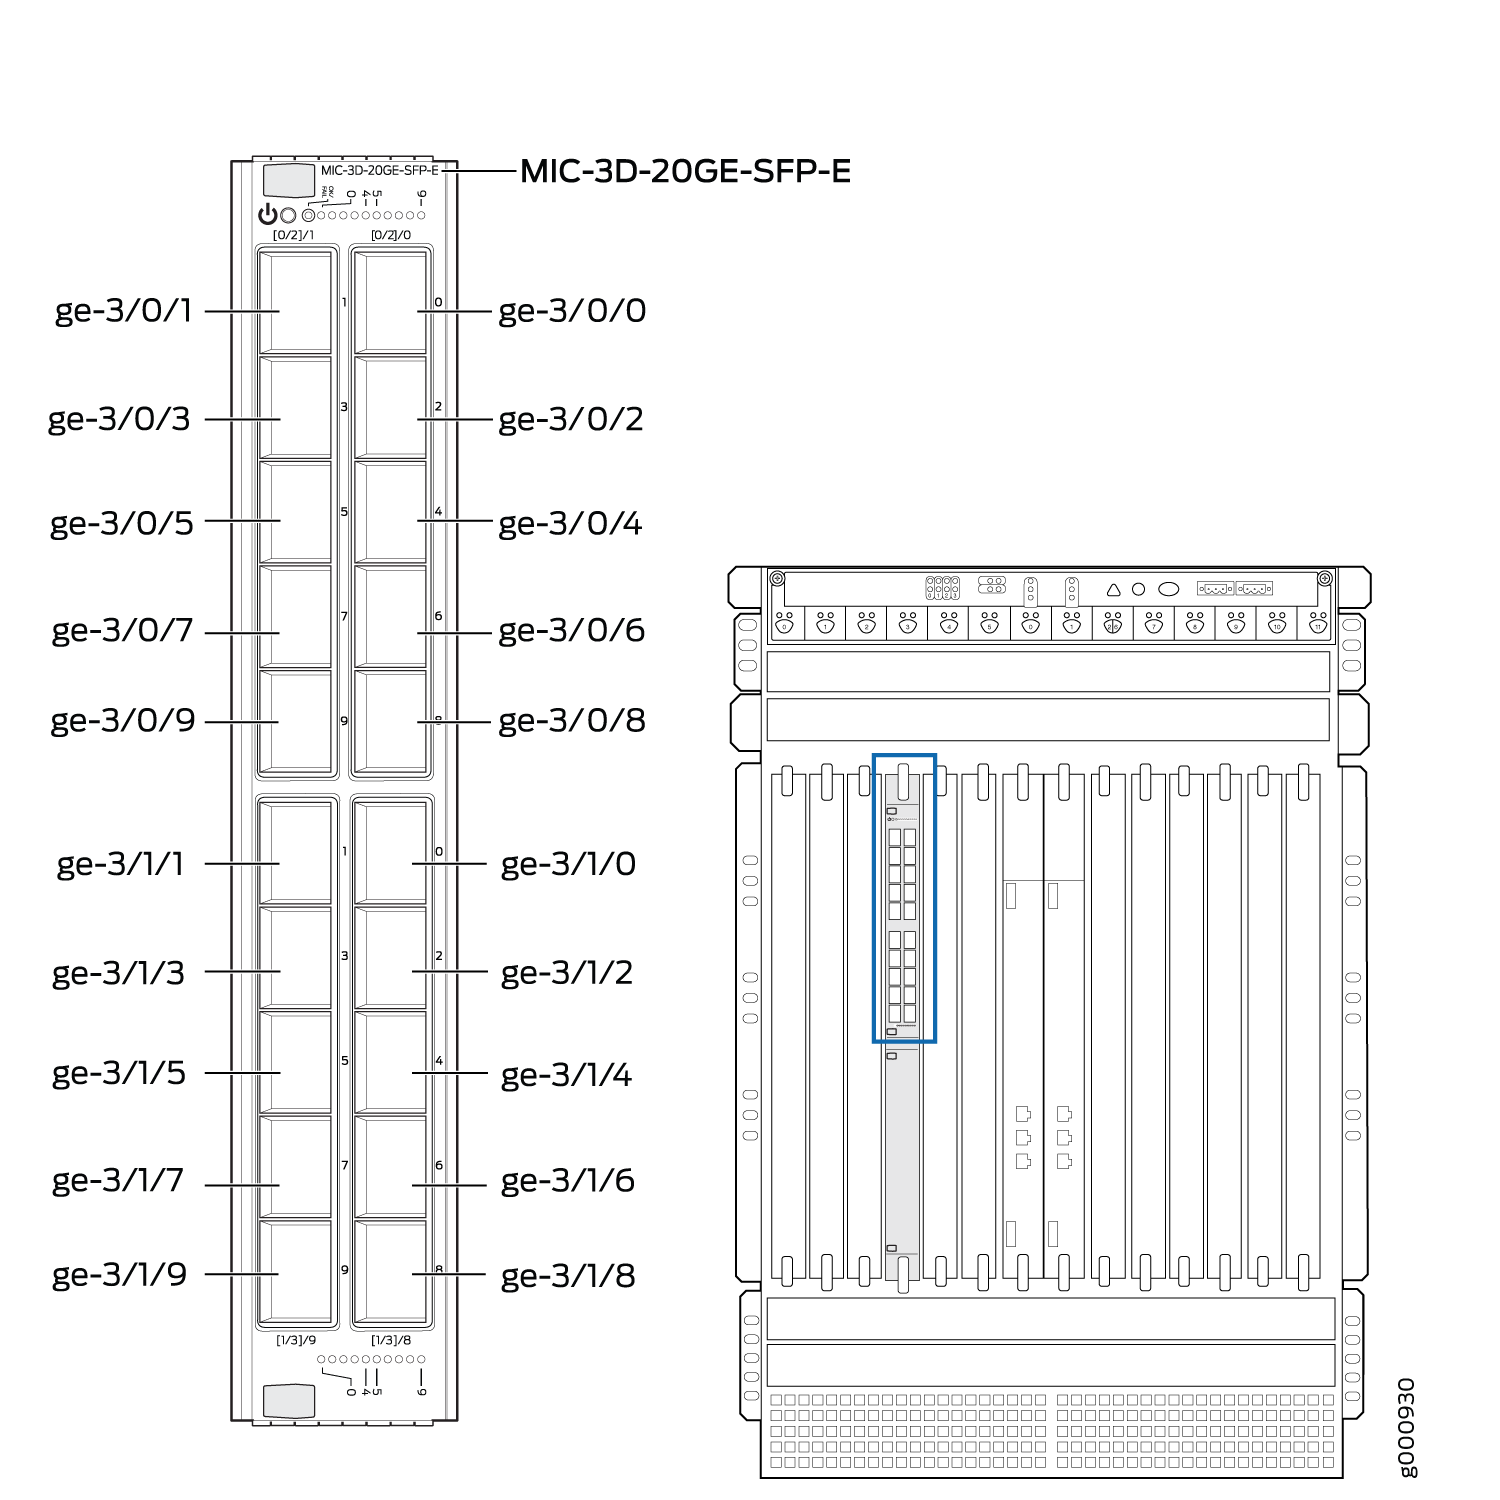 Port Numbering for the MIC-3D-20GE-SFP-E (MX960)